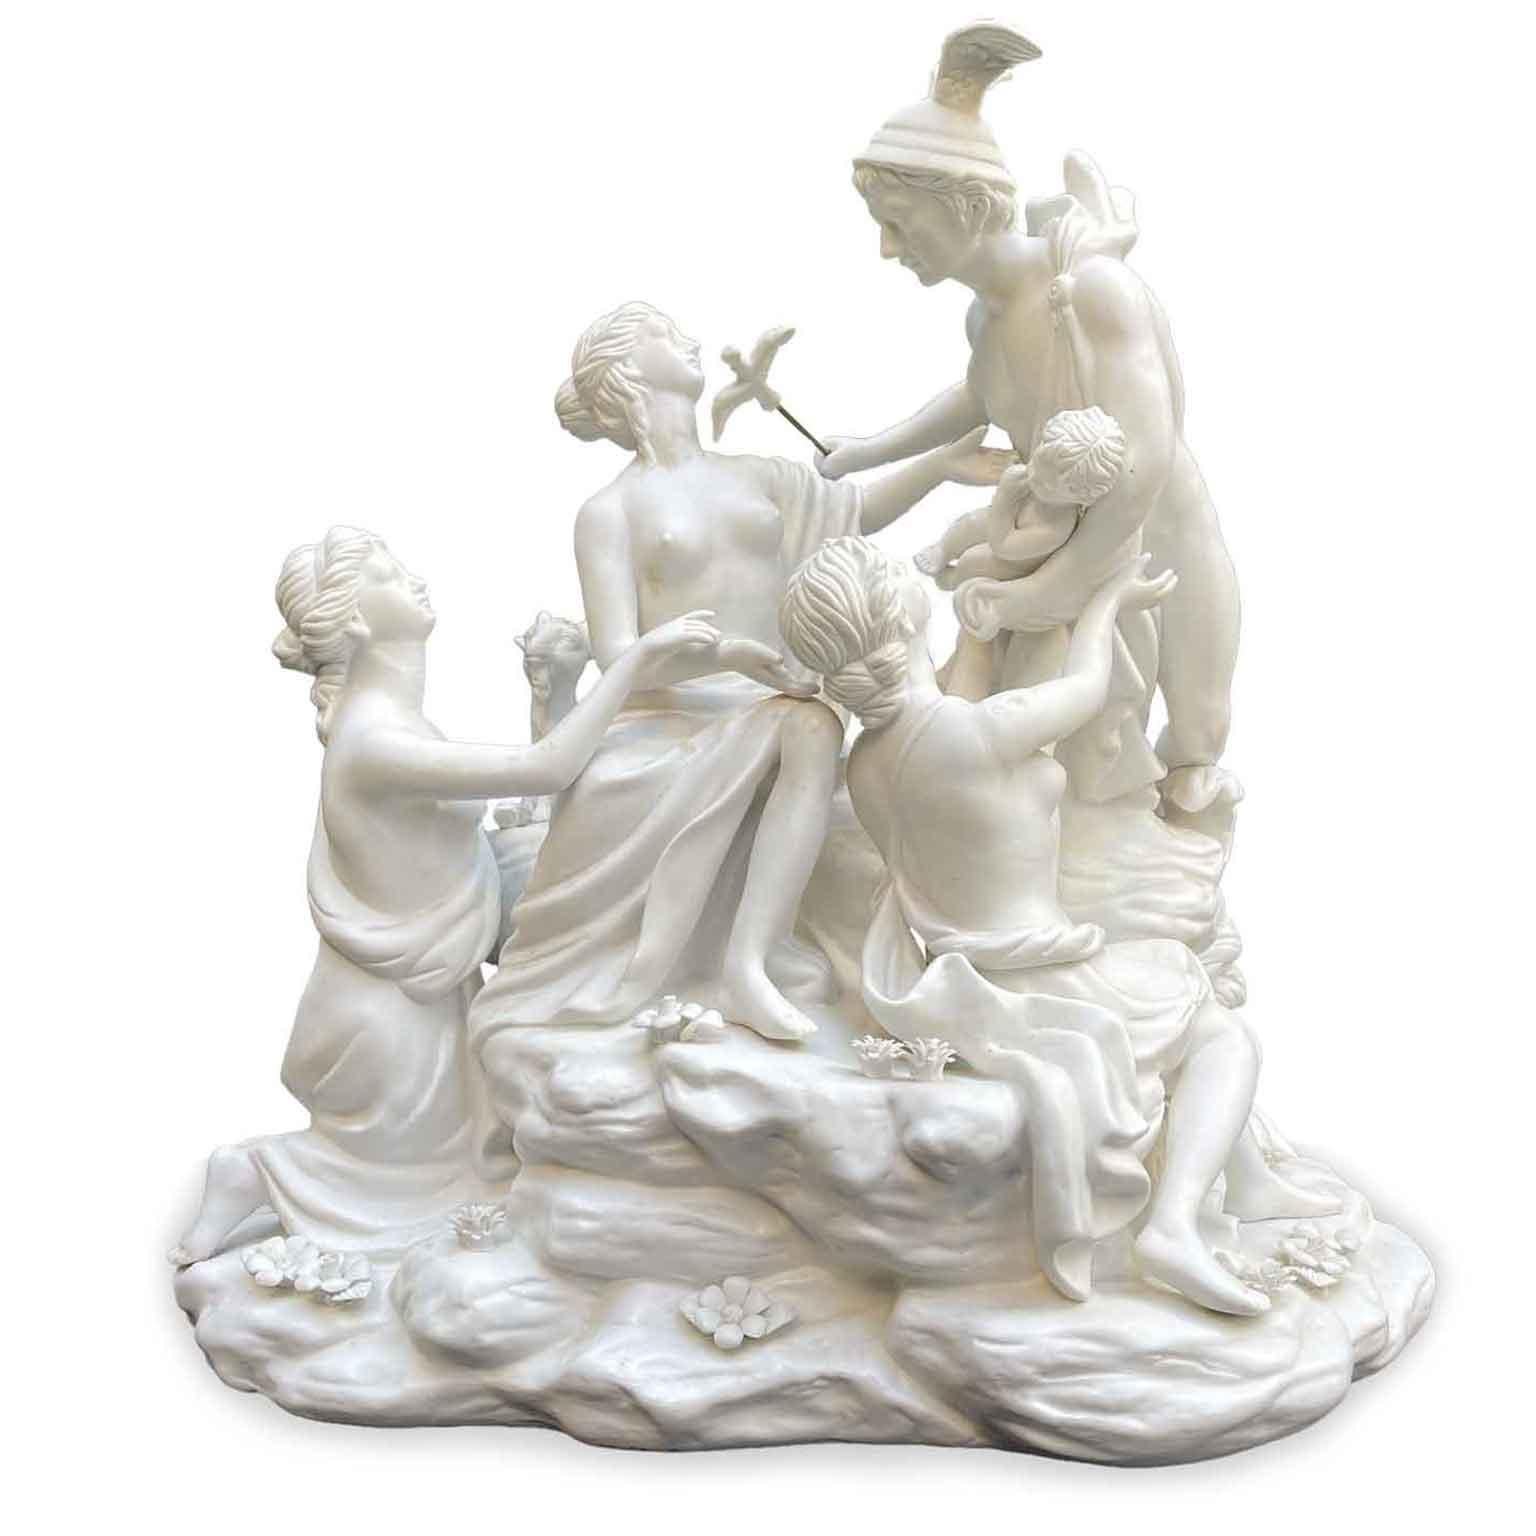 Centerpiece In White Porcelain Biscuit 20th Century Mythological Sculptural Group